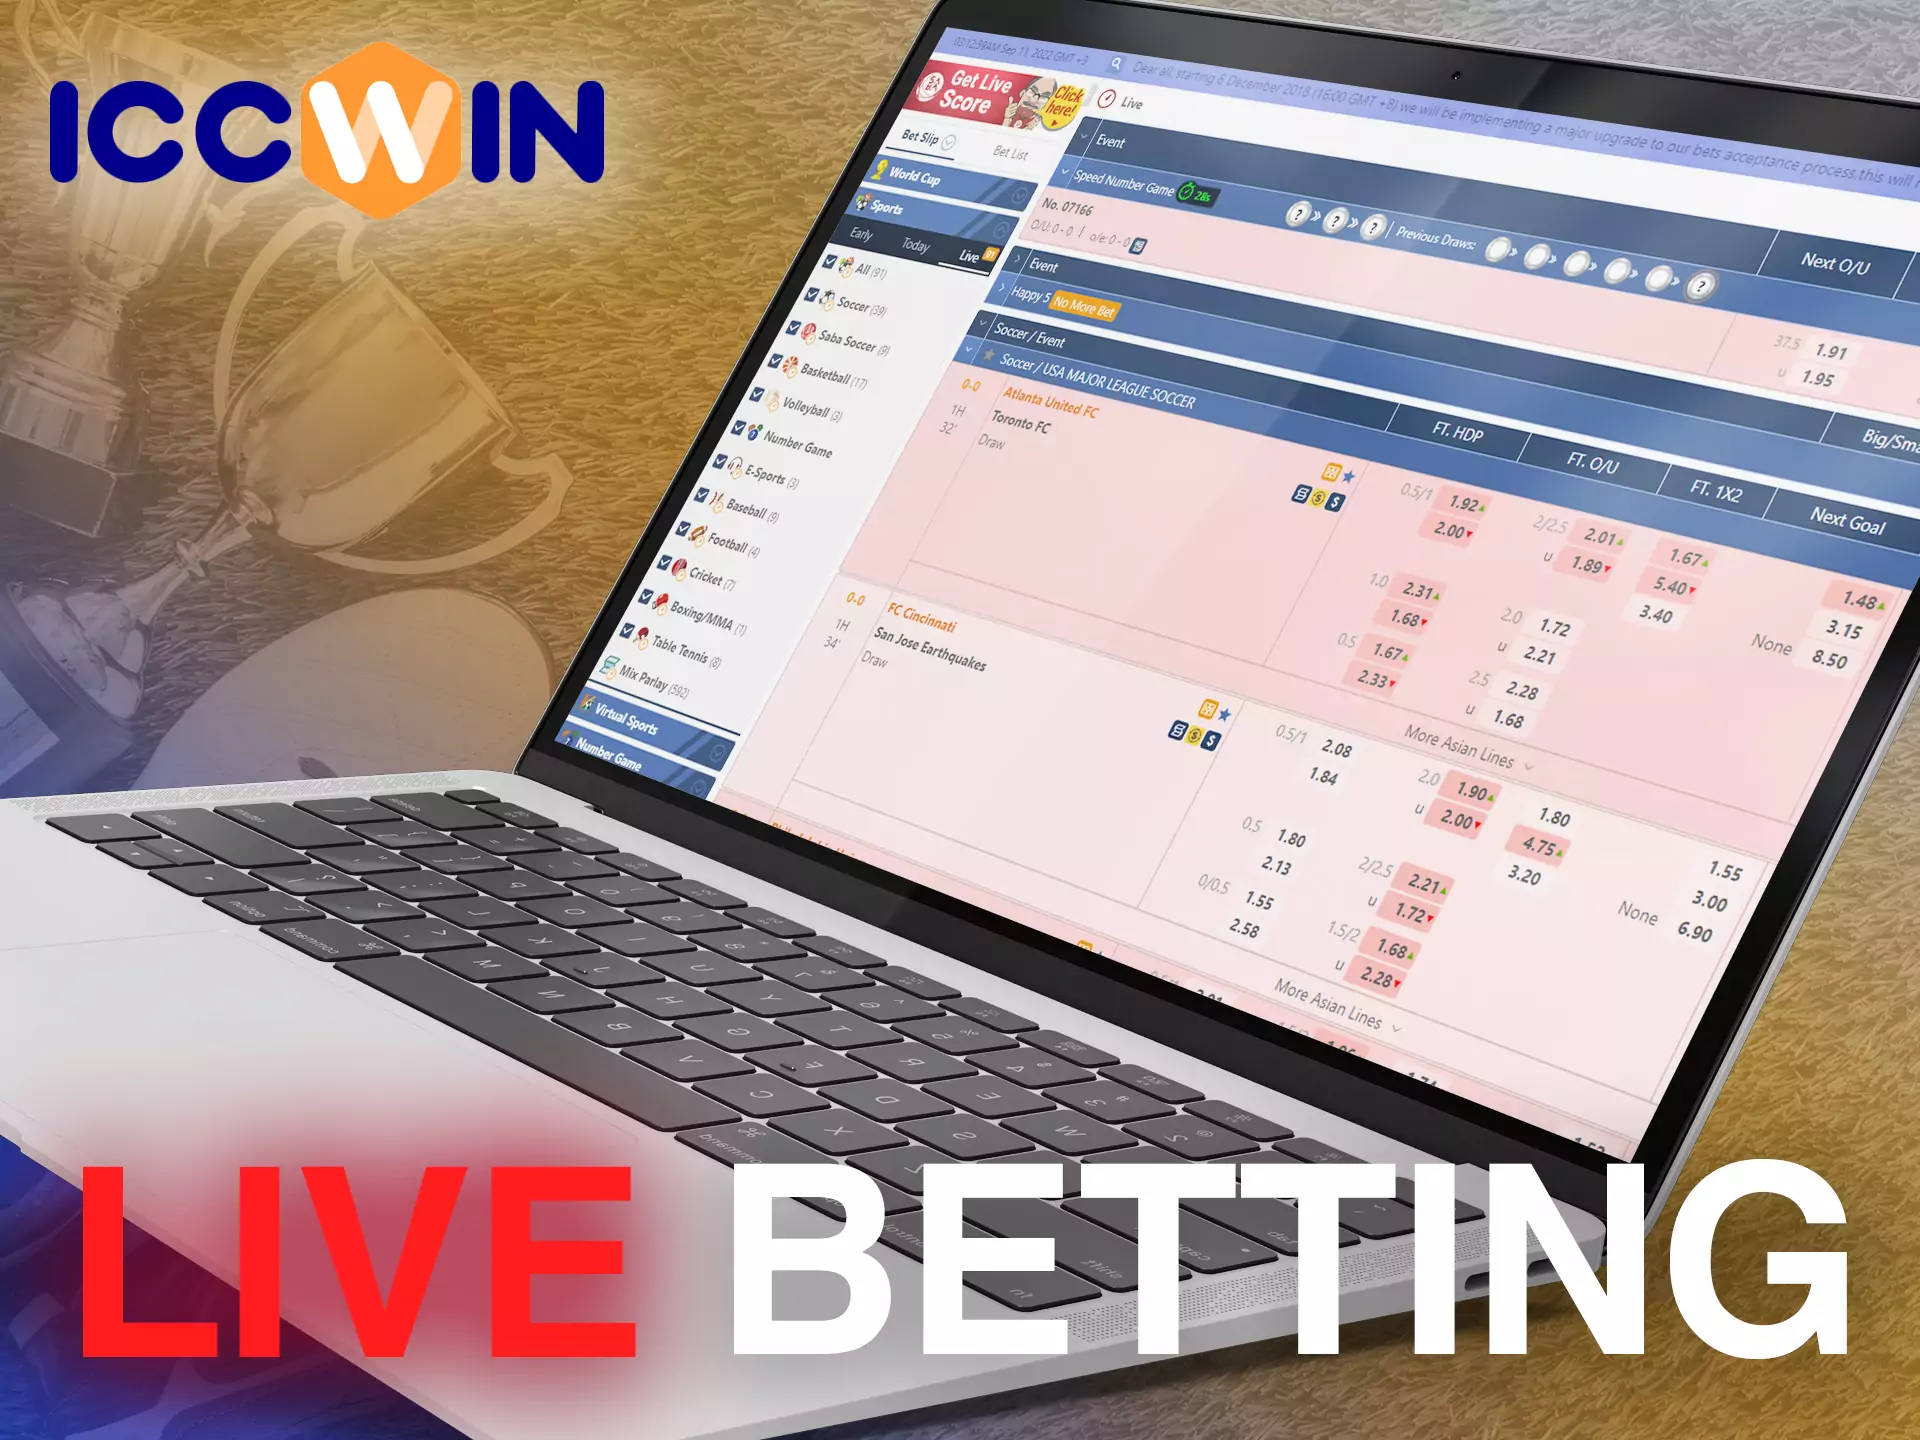 You can place bets on live matches on the ICCWin website.